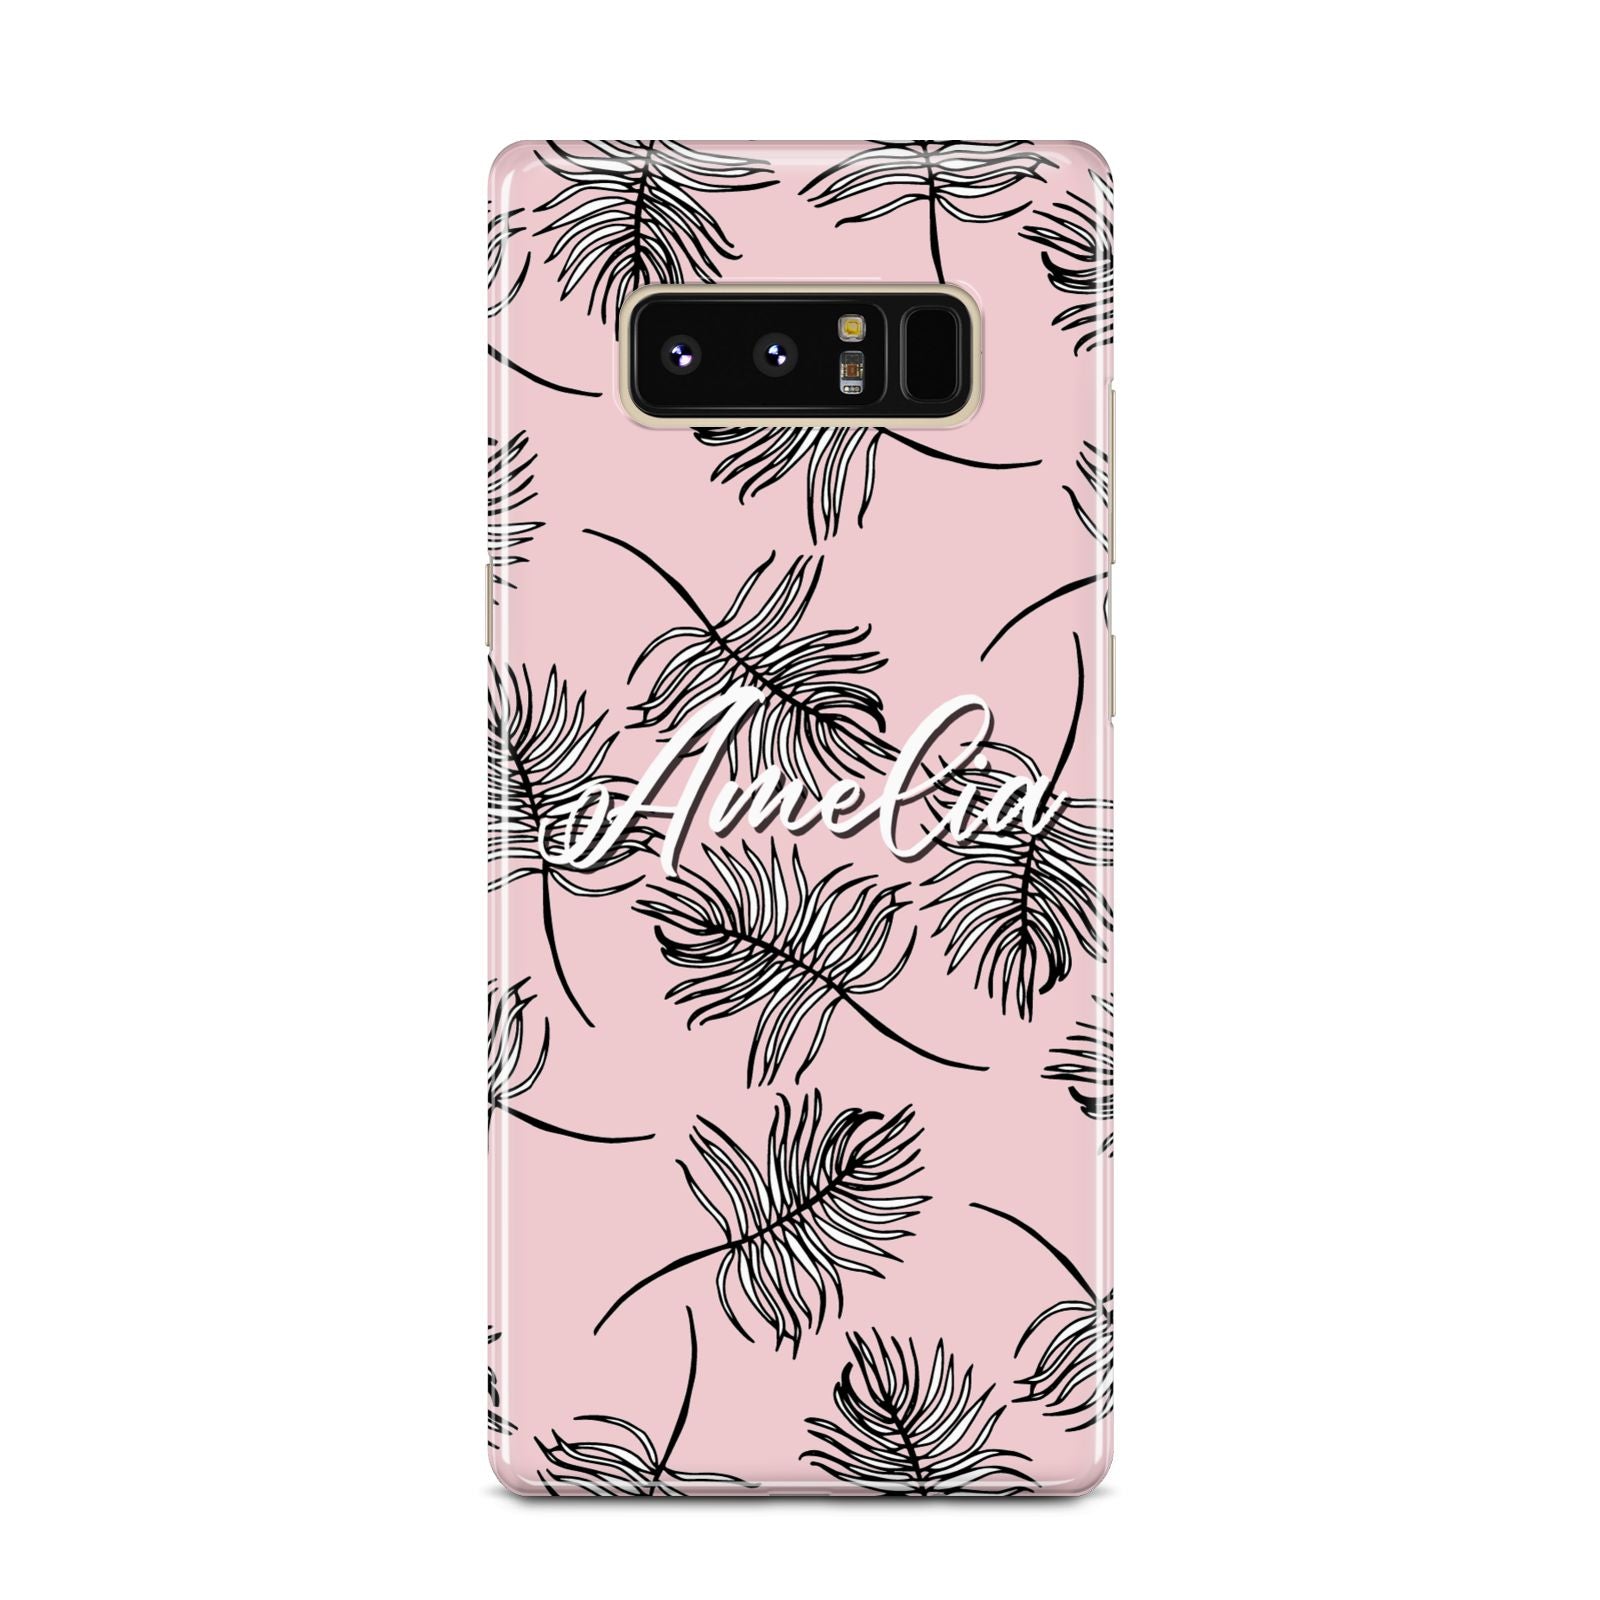 Personalised Pink Monochrome Tropical Leaf Samsung Galaxy Note 8 Case